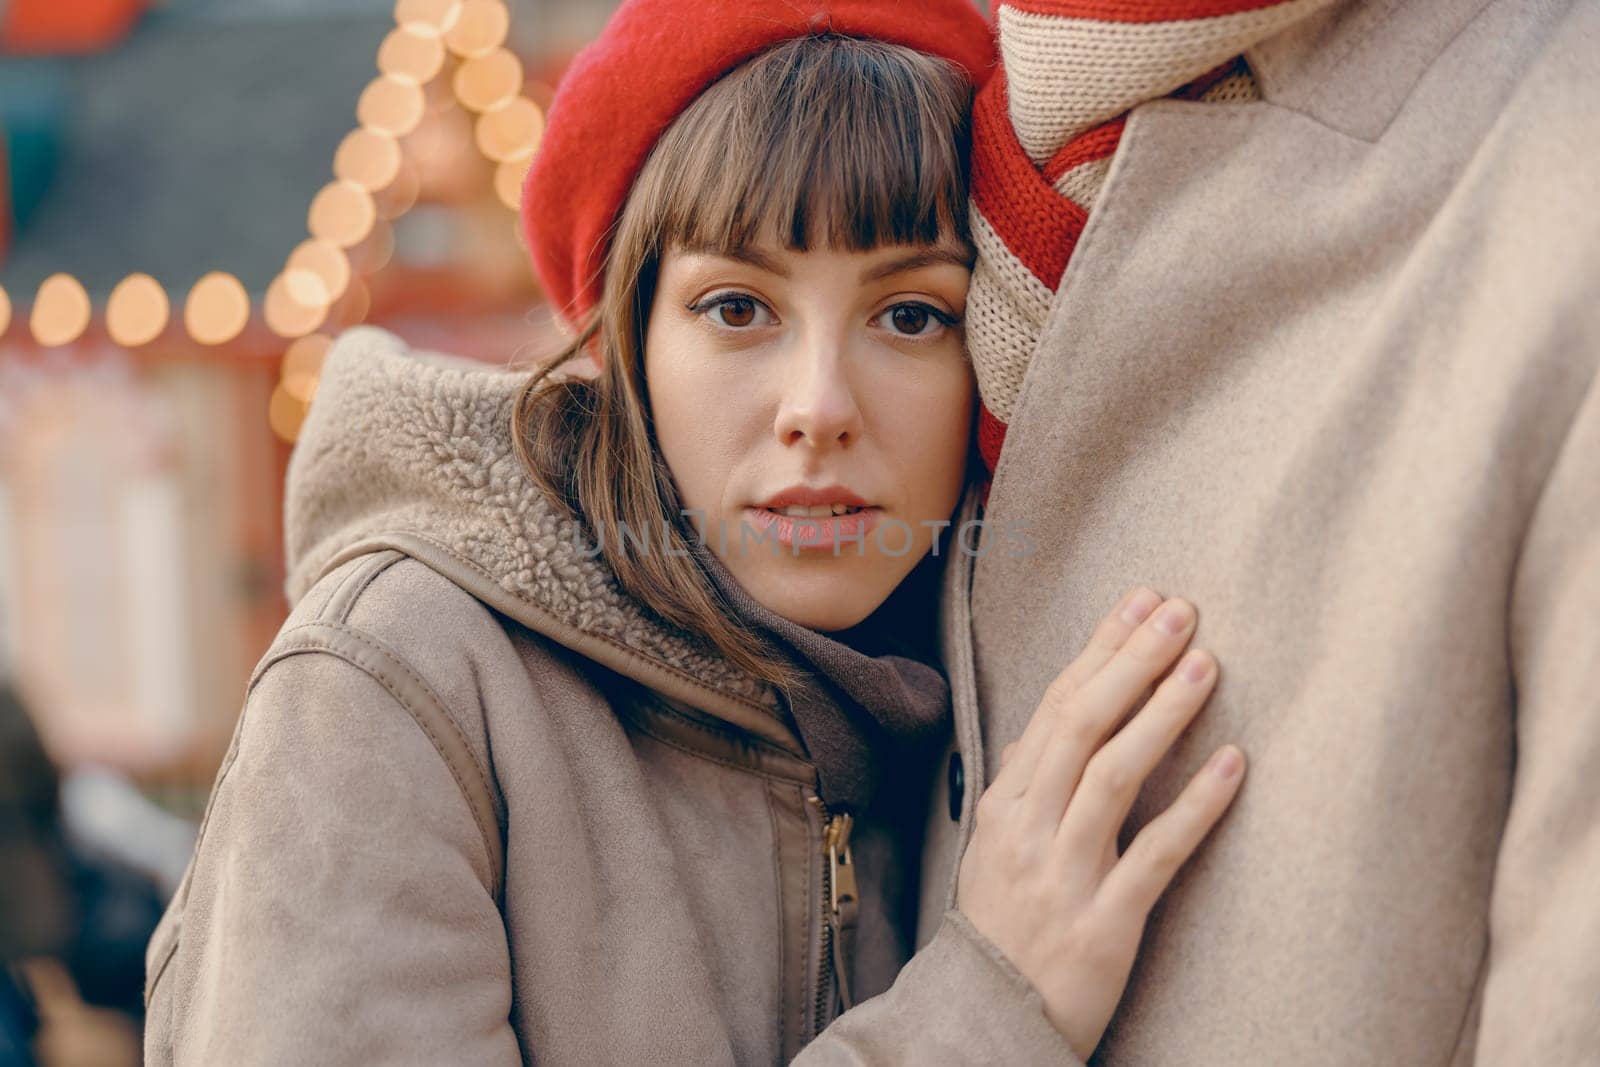 Young woman finding comfort in her partner's embrace at a festive outdoor Christmas market by Yaroslav_astakhov